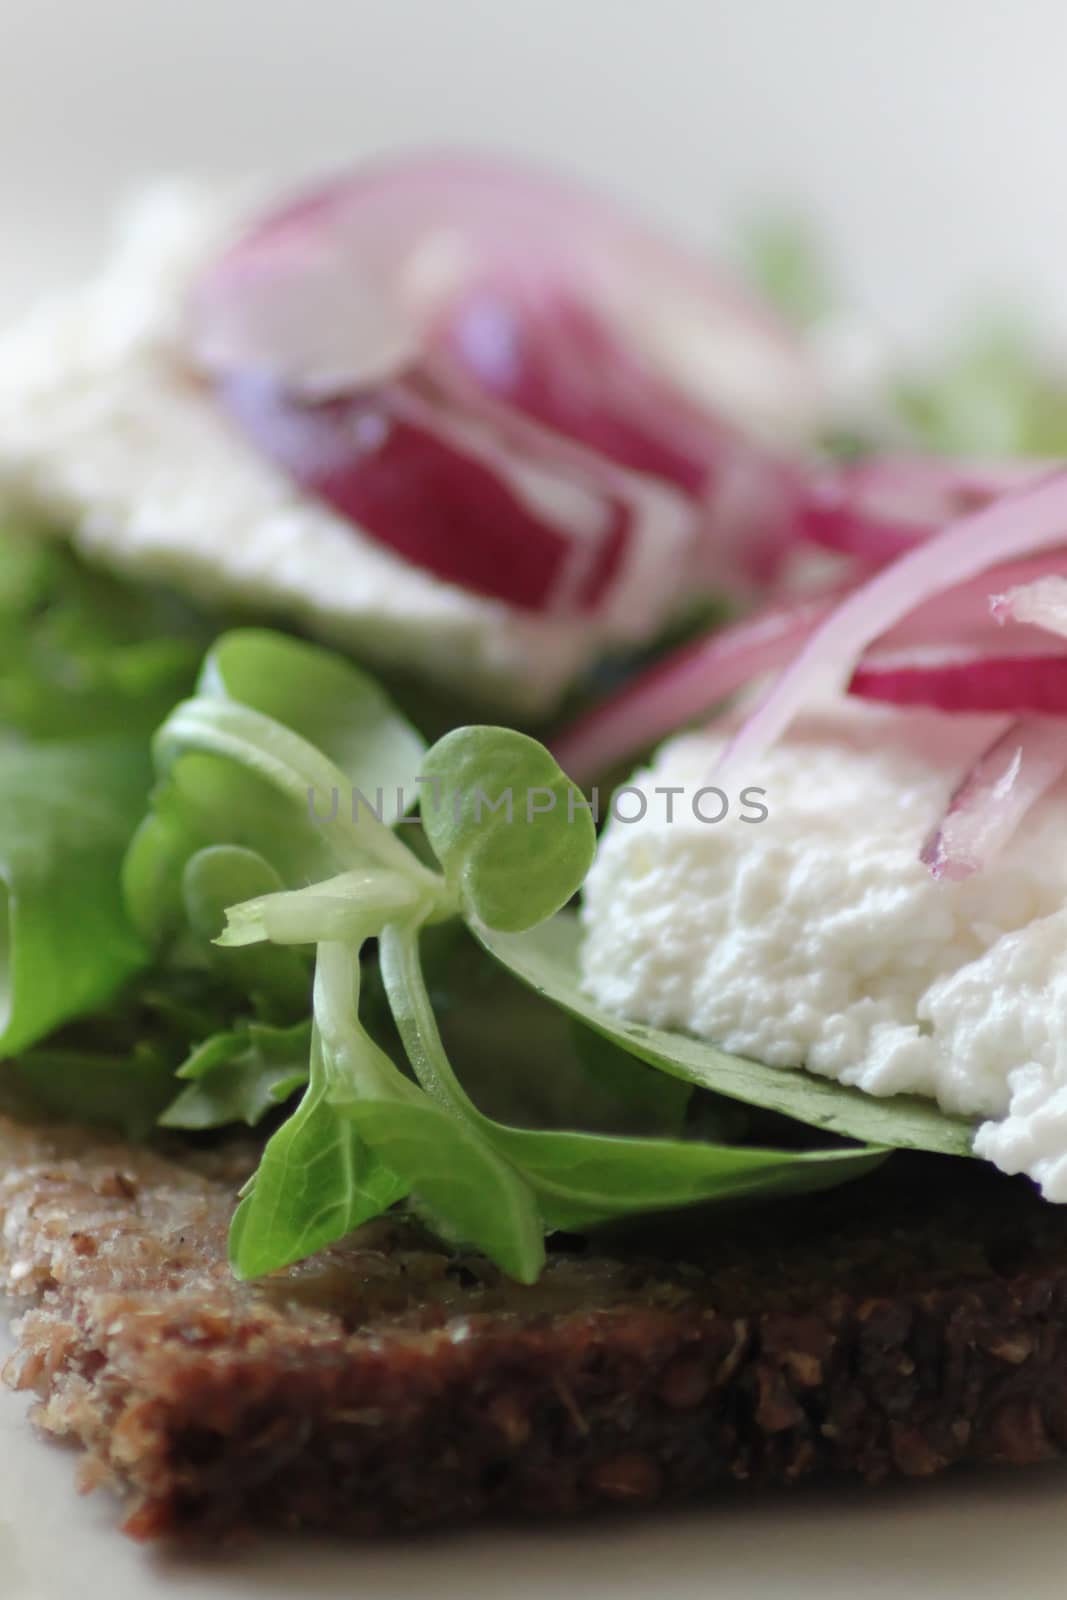 Sandwich with black bread, cottage cheese, rucola, onion.